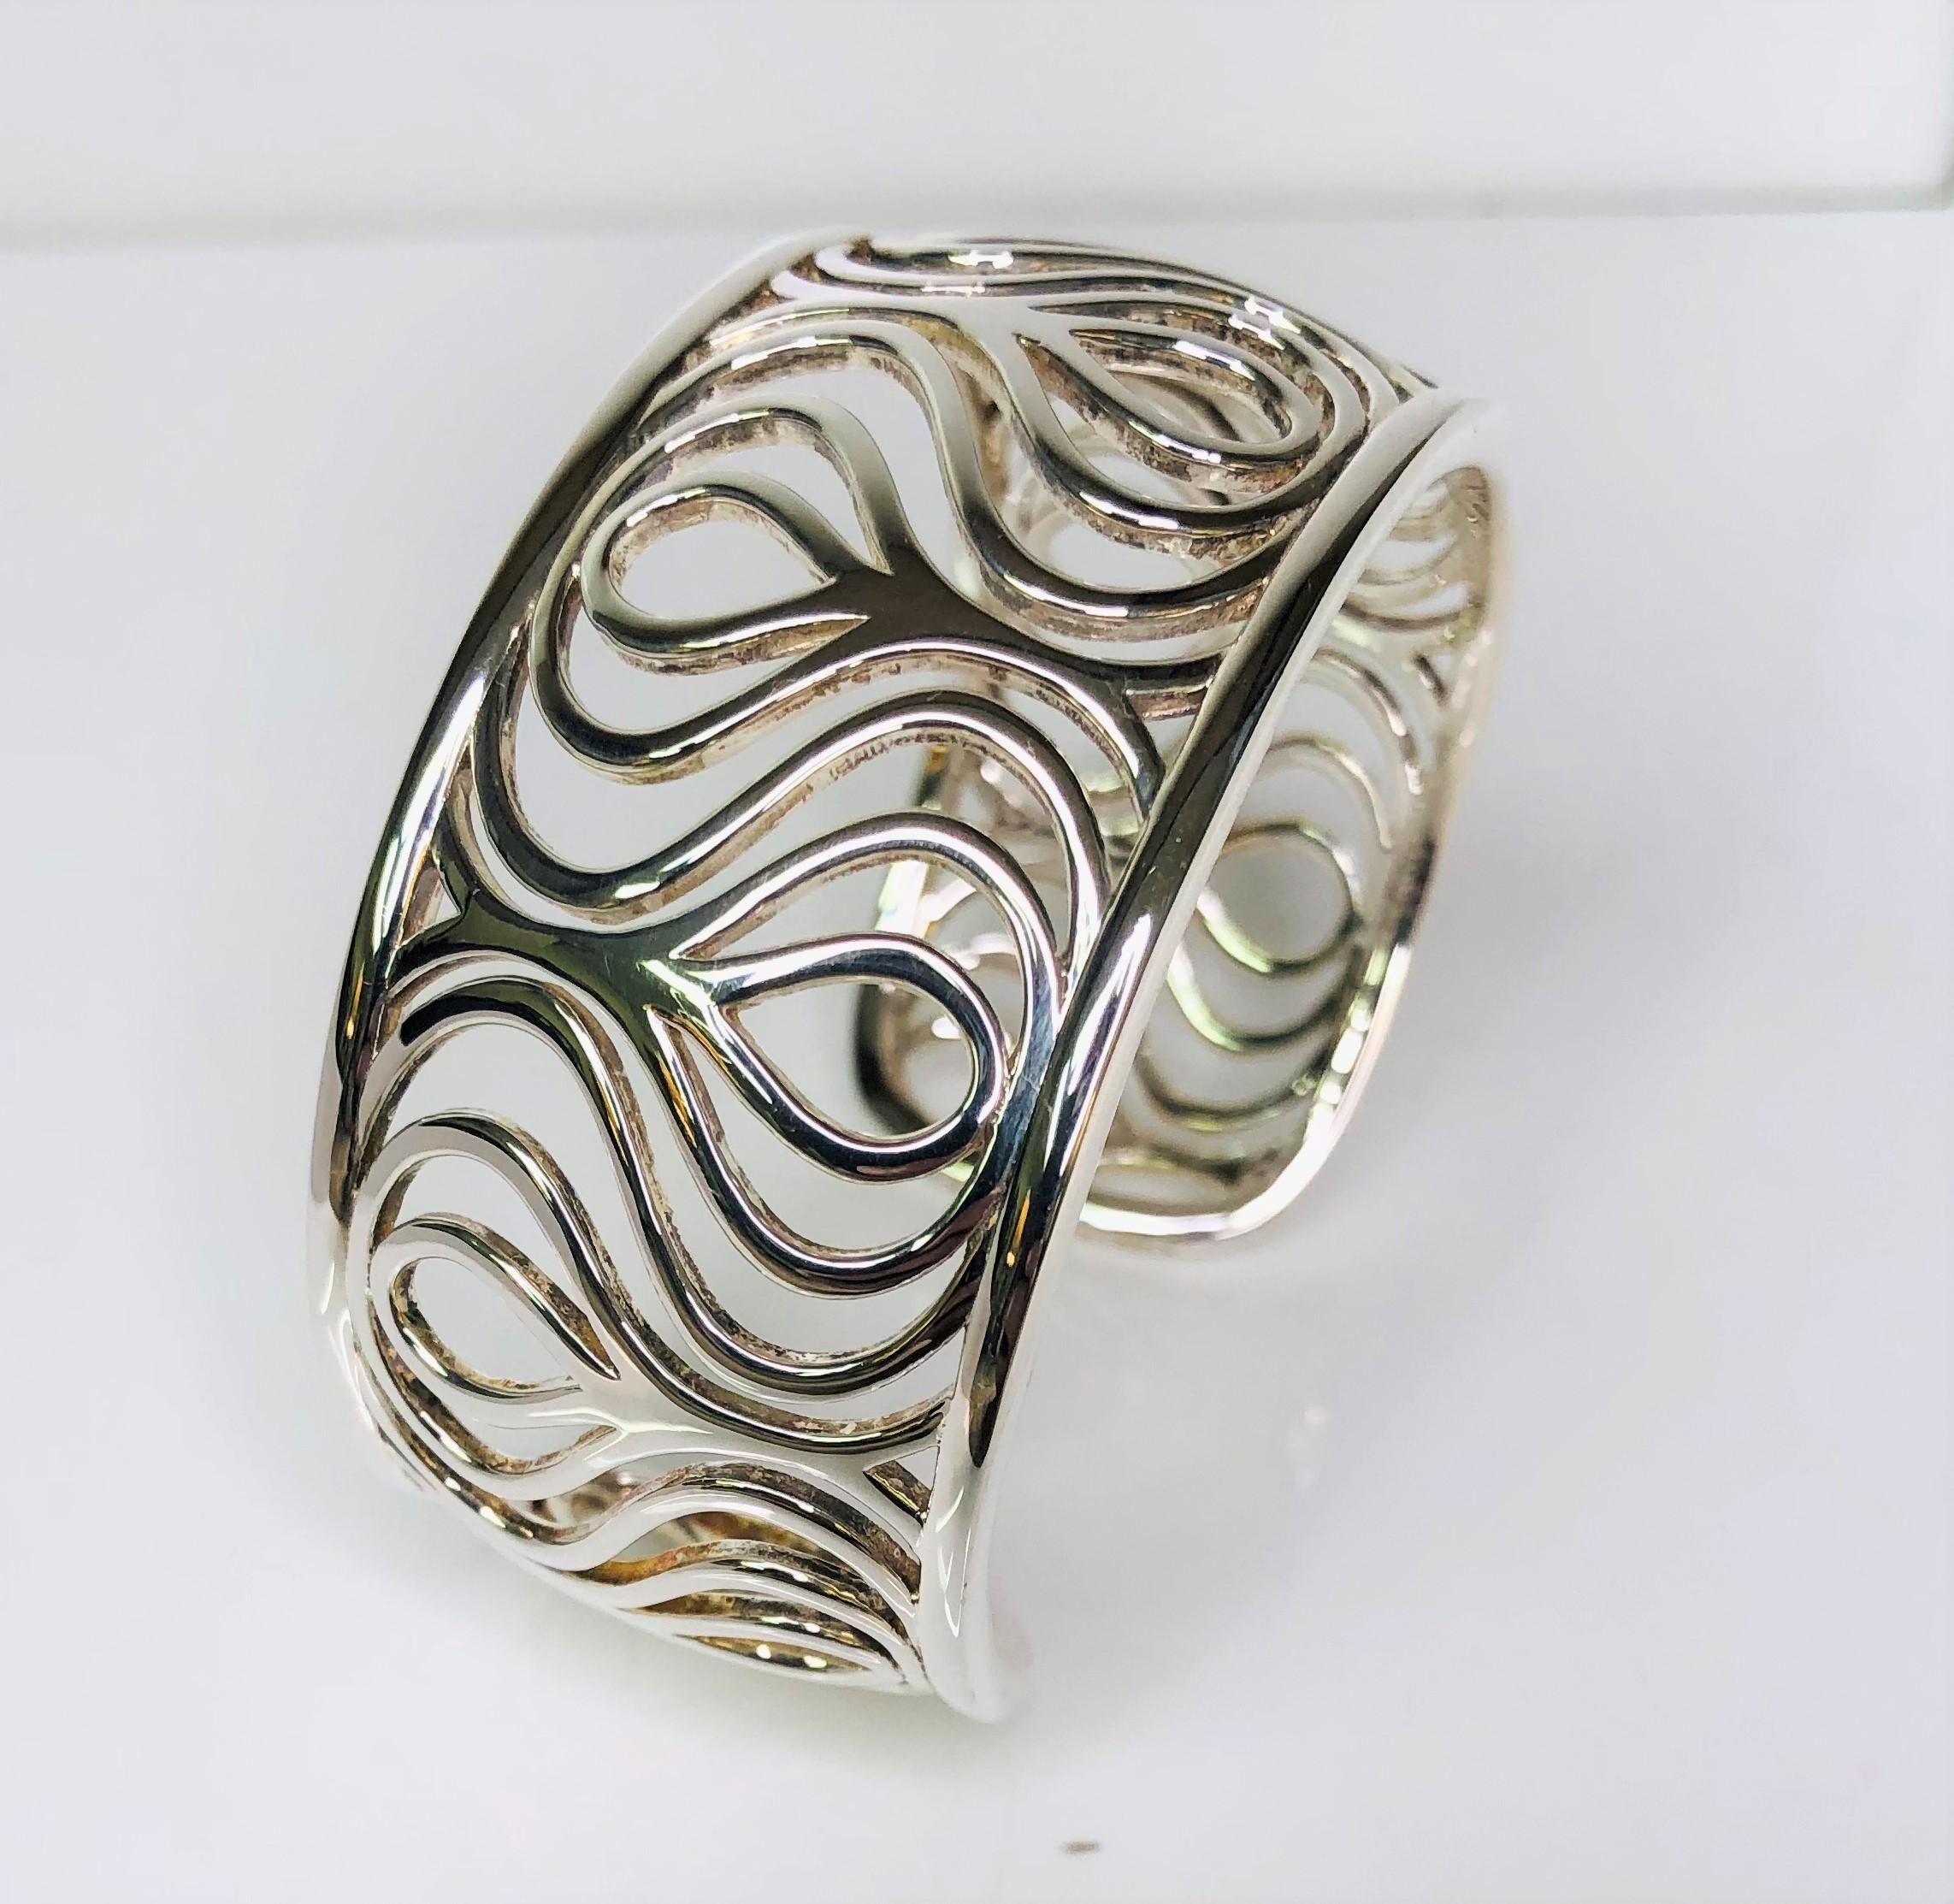 By Thistle & Bee, this beautiful cuff is an easy everyday piece.  It can also be worn for fancy evening out!
Sterling Silver 'swirl' or plume design.
Stamped 